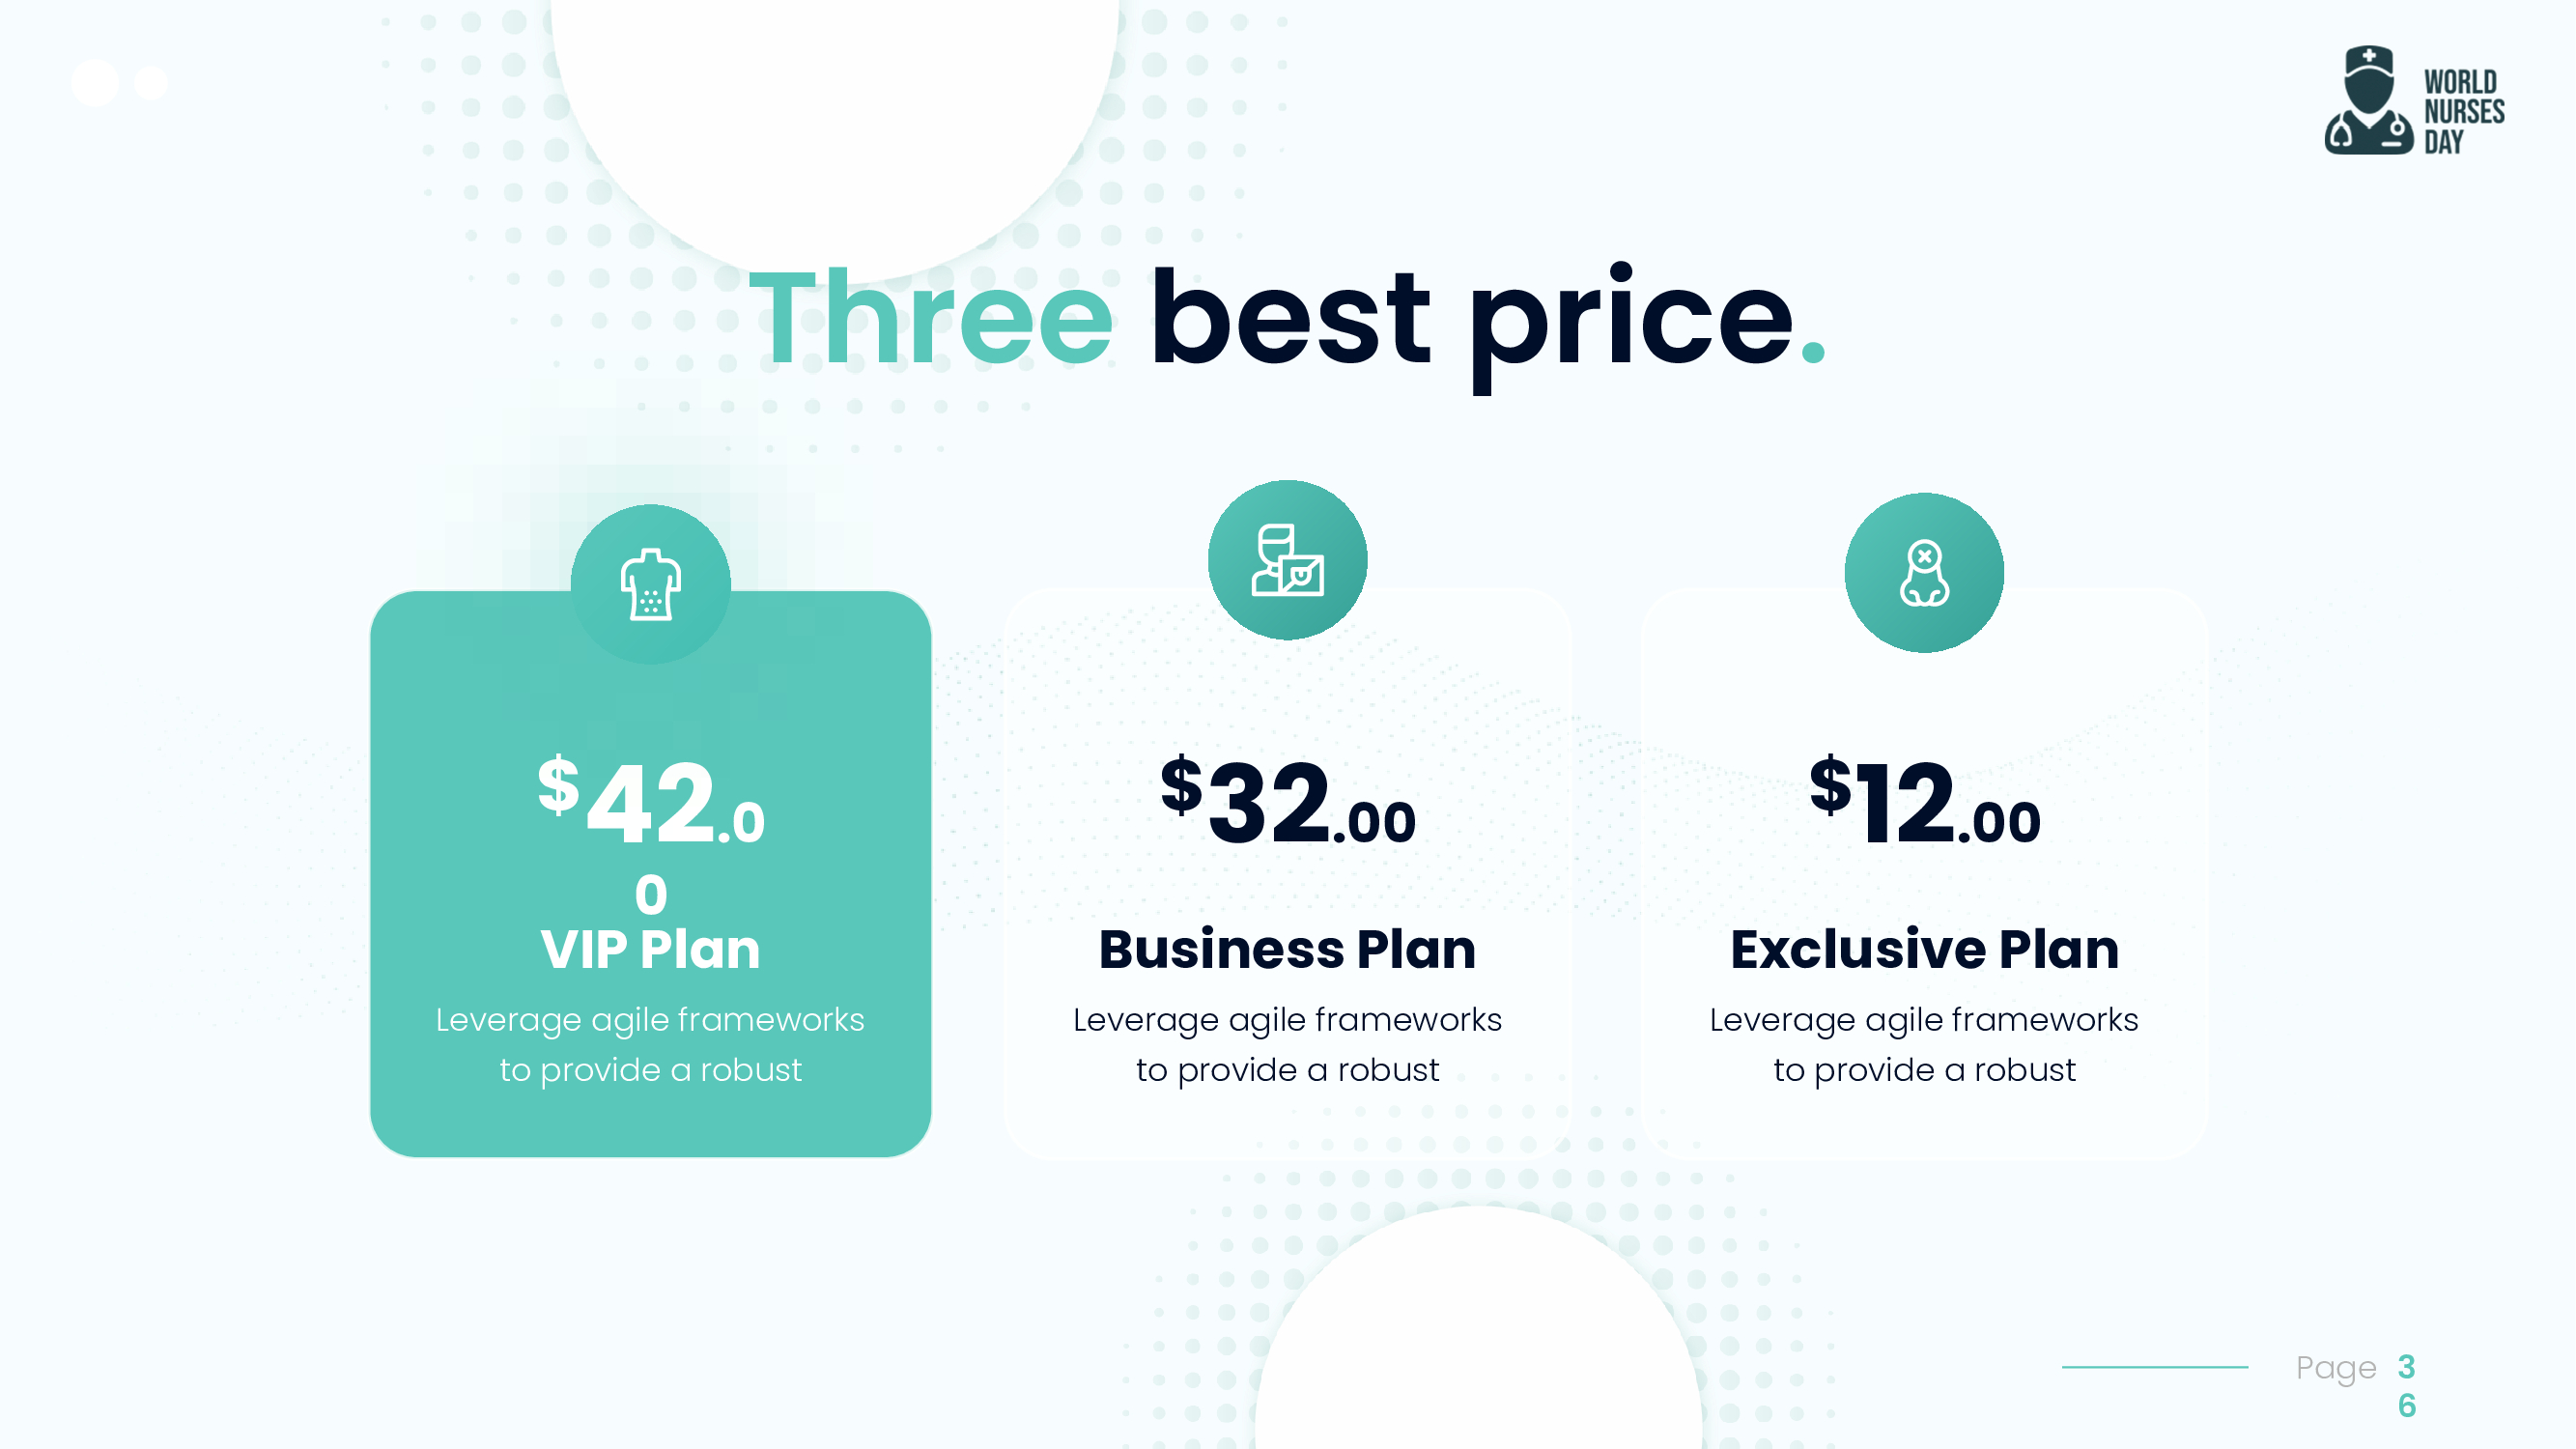 Diversity of prices for VIP, business and exclusive plan.